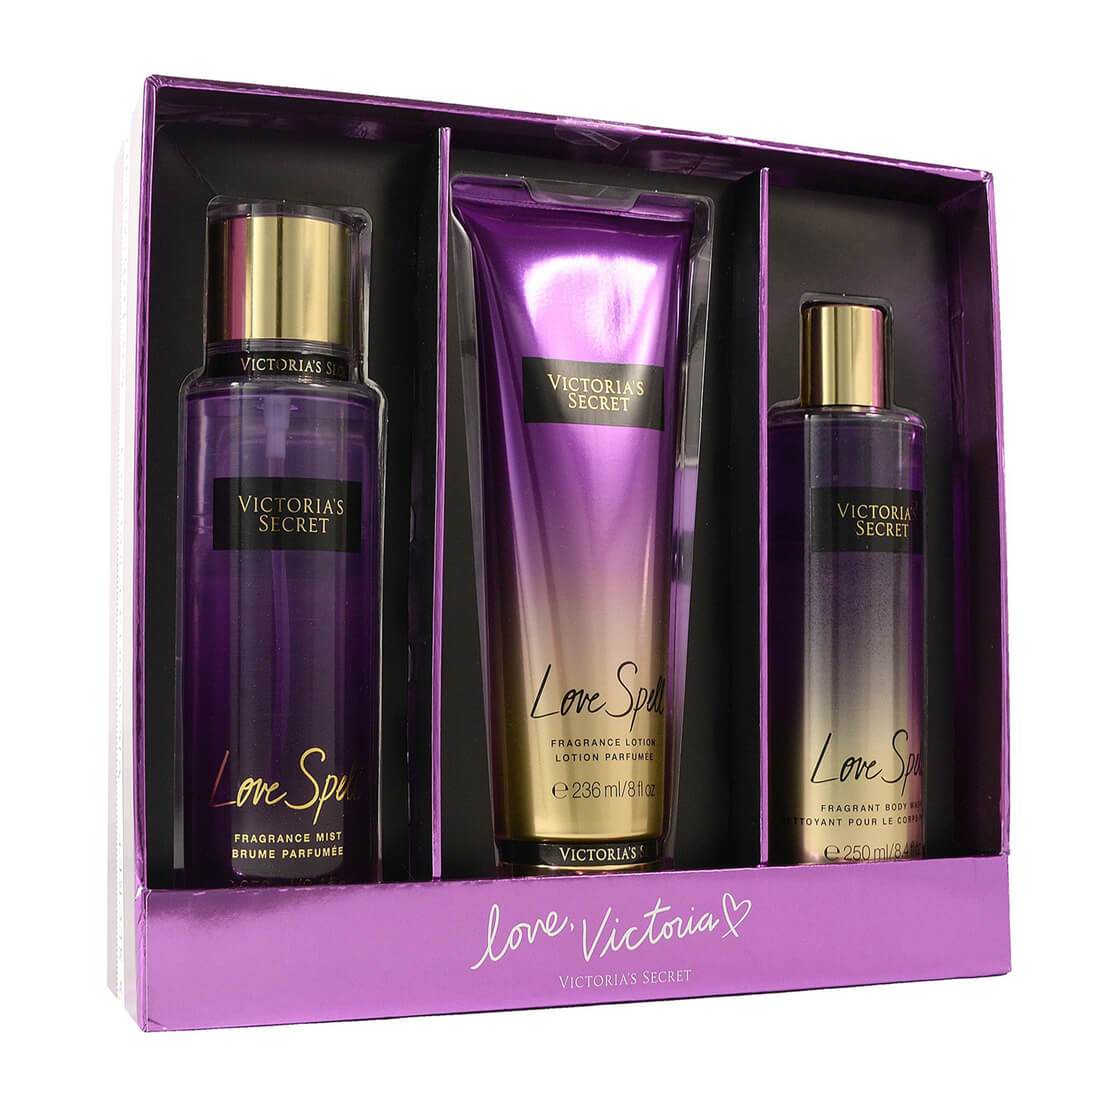 Buy Victoria's Secret Noir Tease Gift Set Body Lotion Body Mist, 2 Pieces  (Pack of 2) Online at Low Prices in India - Amazon.in